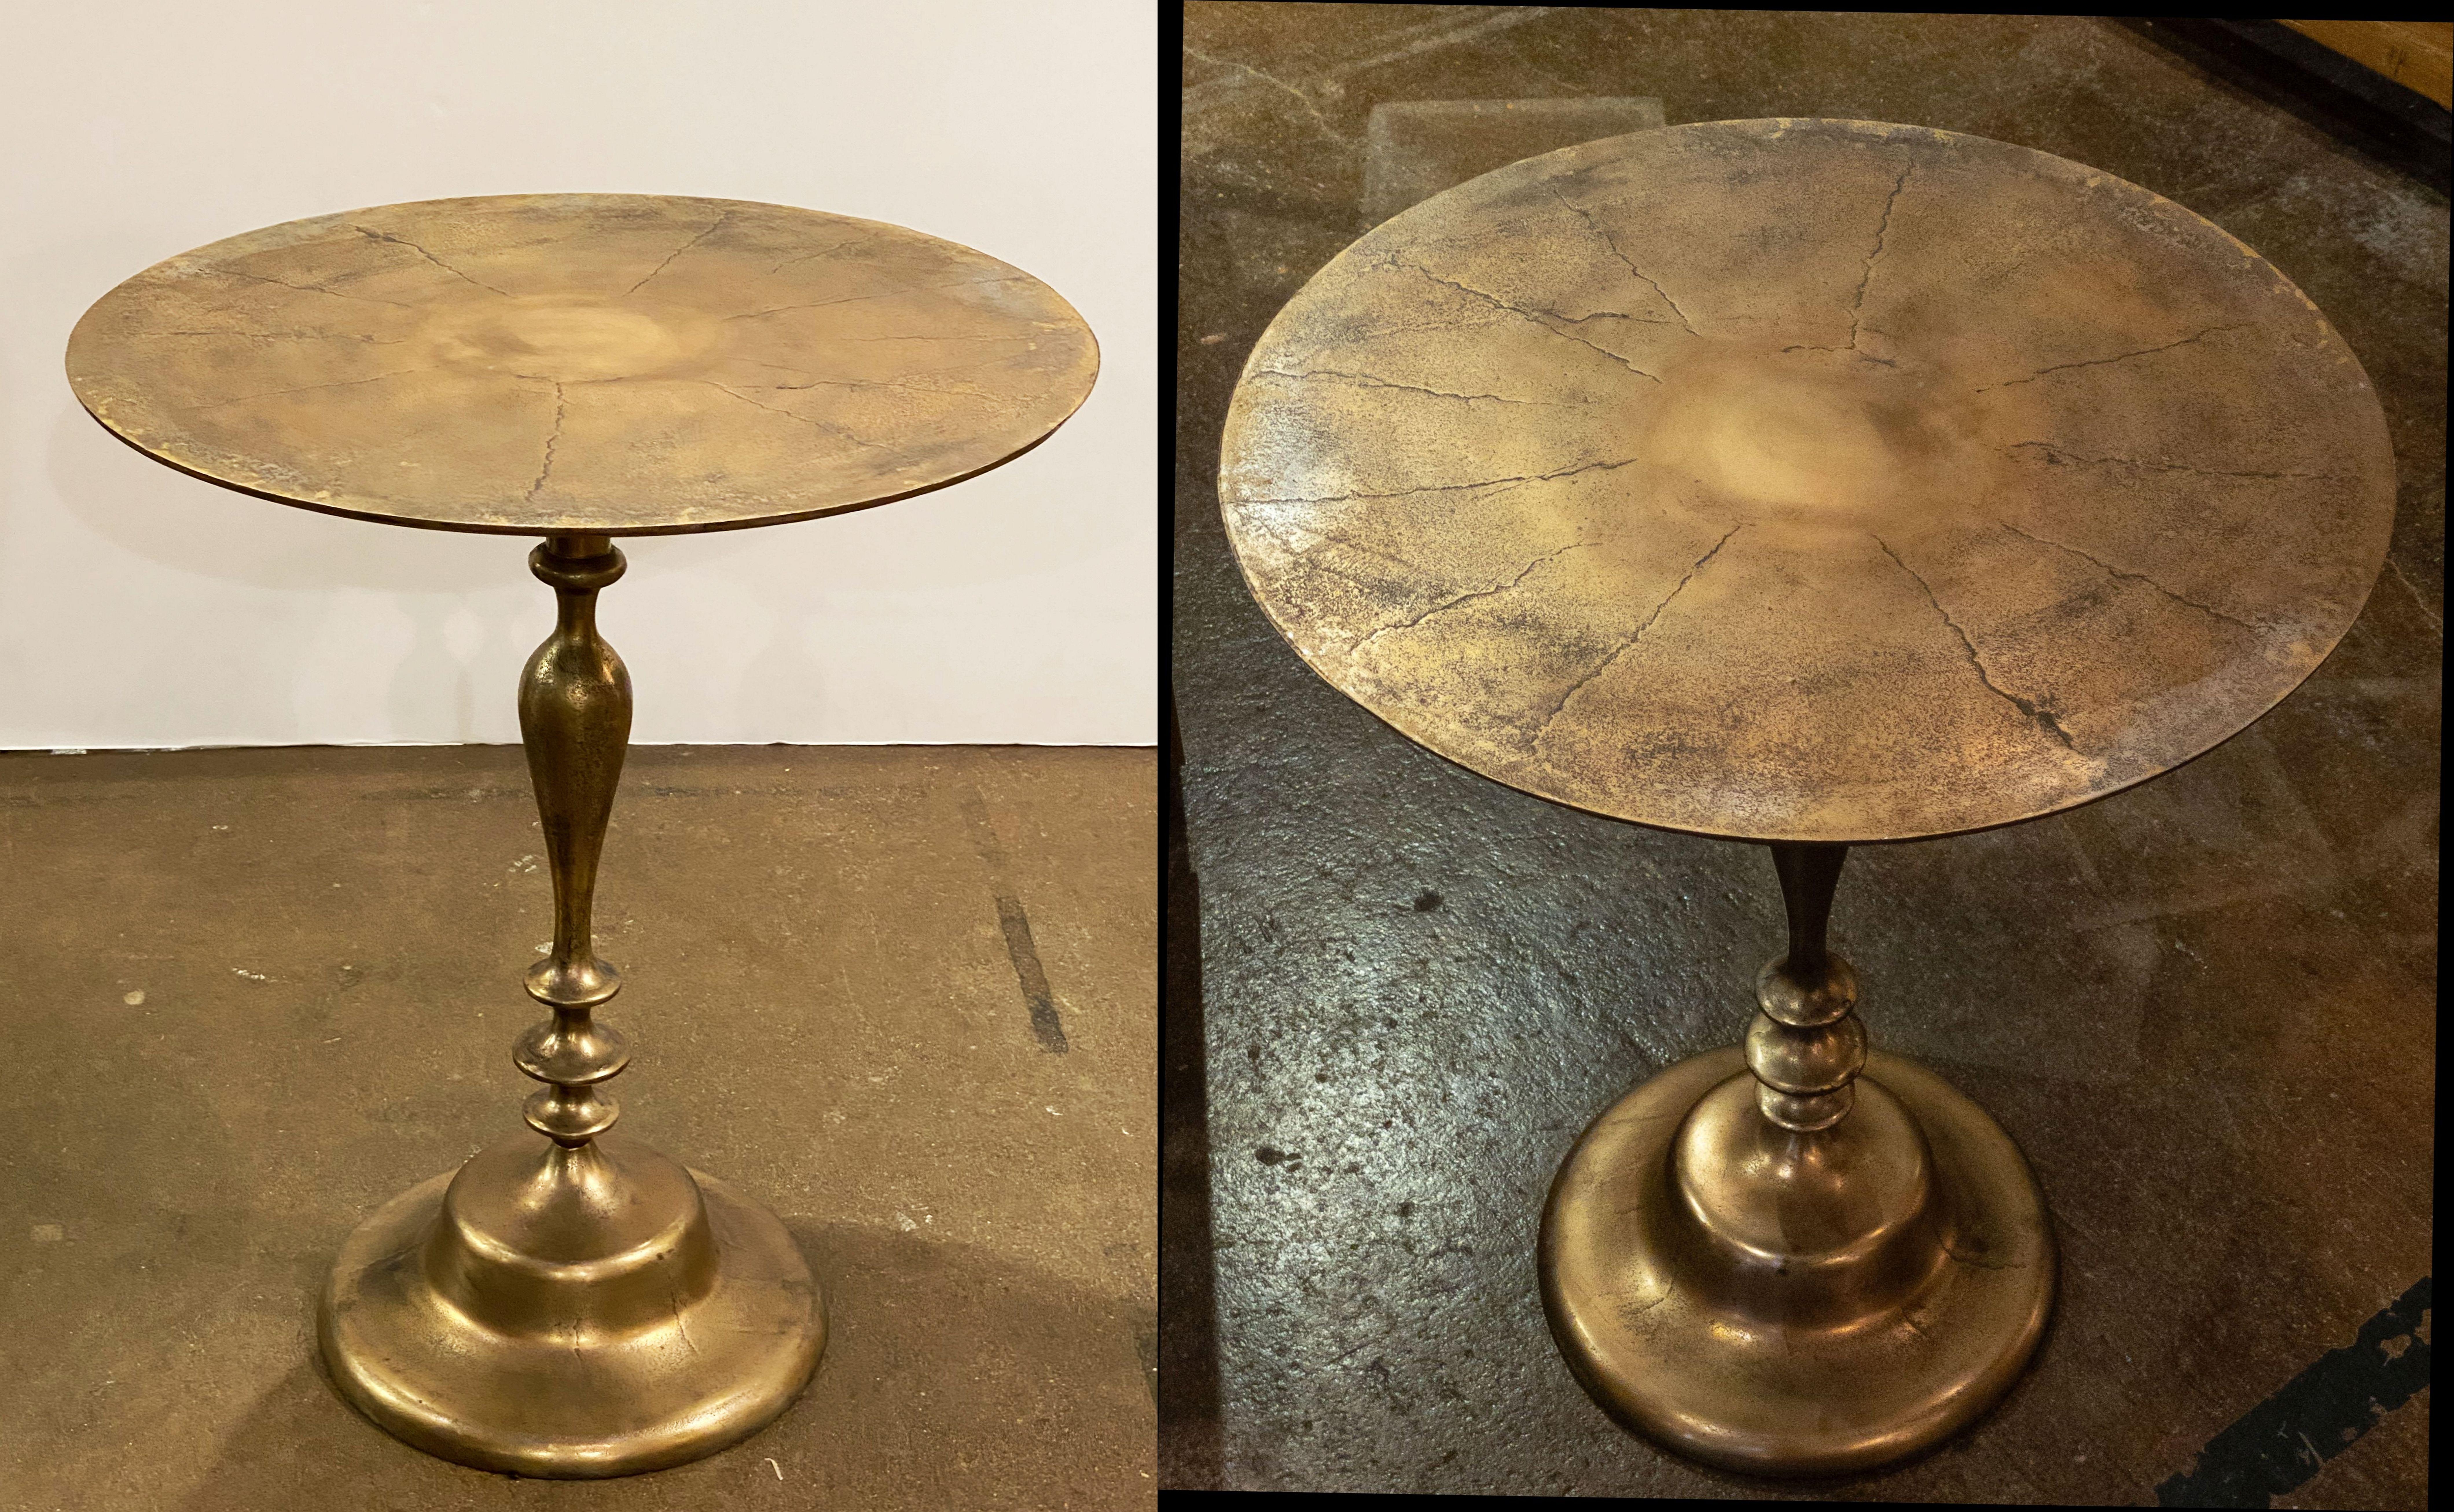 A fine French round or circular top occasional or bistro table of cast aluminum, featuring a round top mounted to a stylish column base.
Marked on underside of table: Ritz Hotel - Paris.

Dimensions: Height 23 1/2 inches x diameter 20 1/4